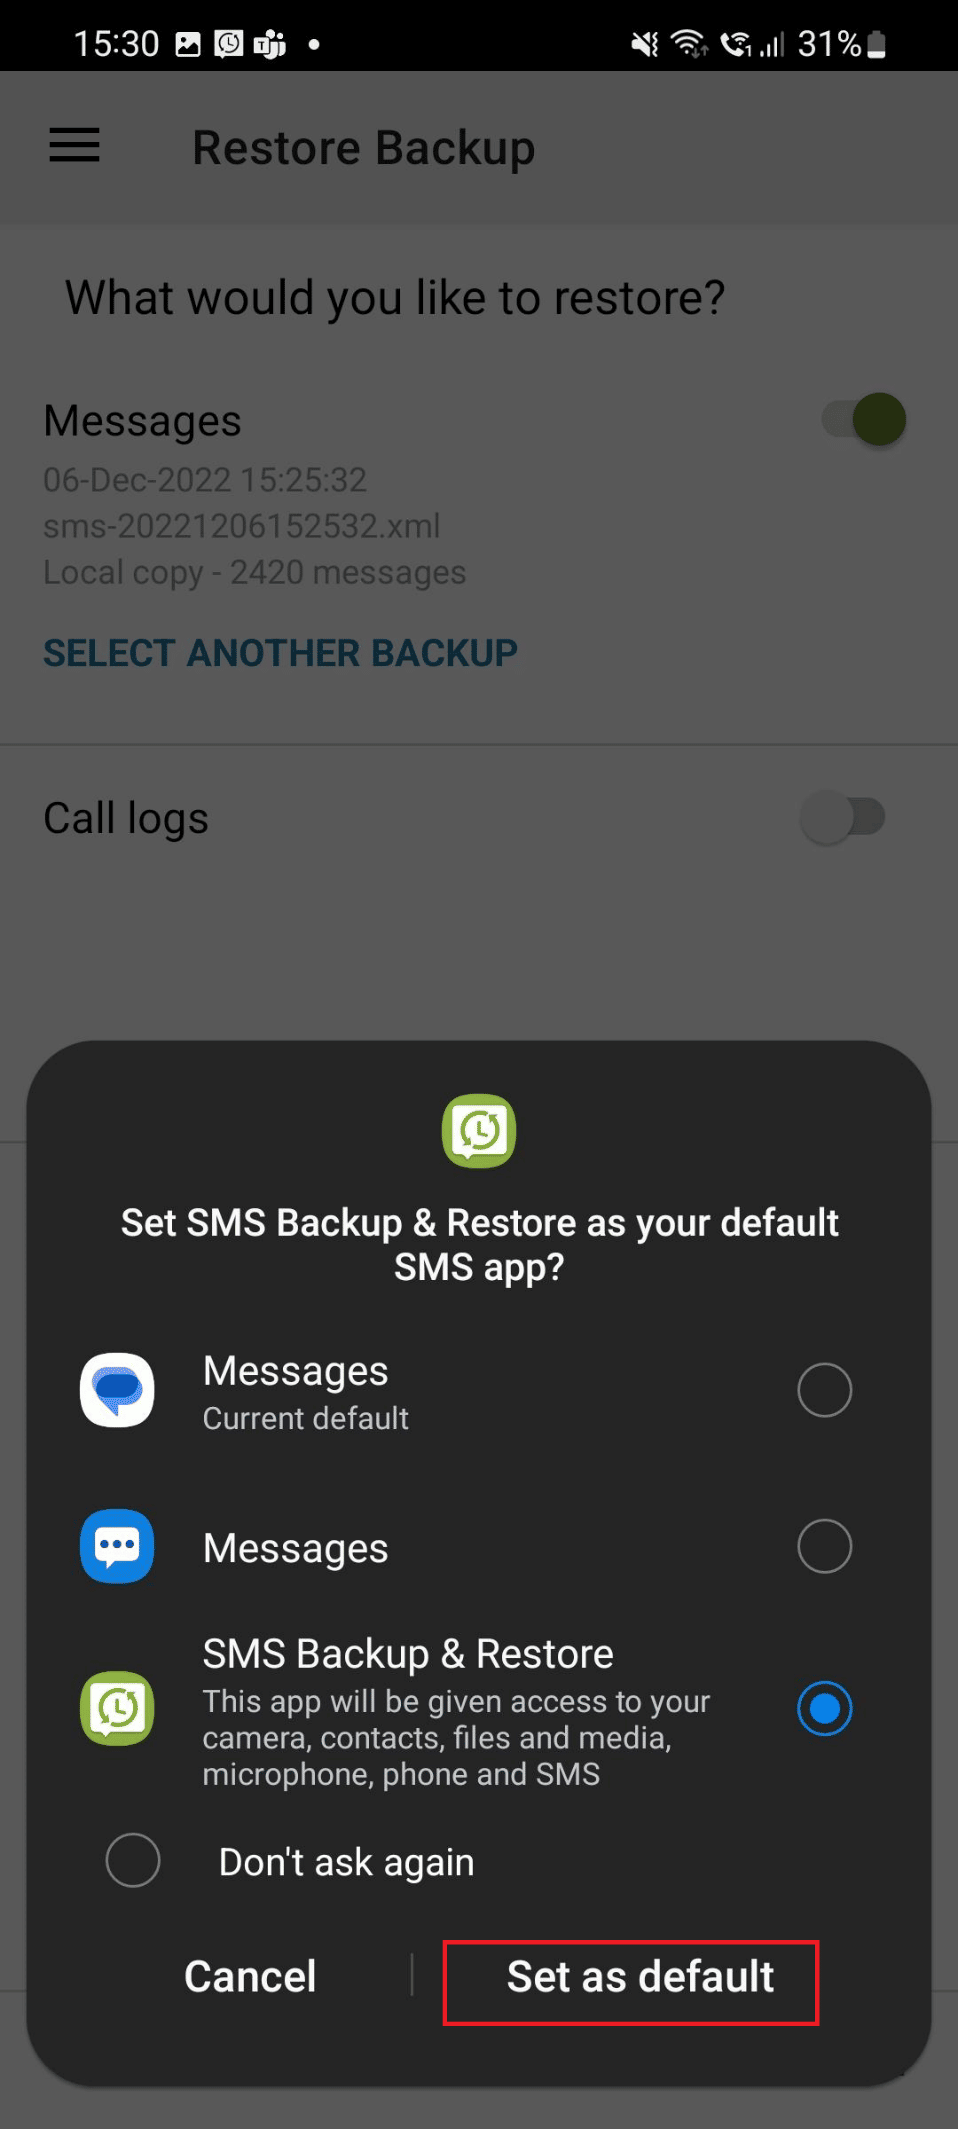 tap on the Set as default application